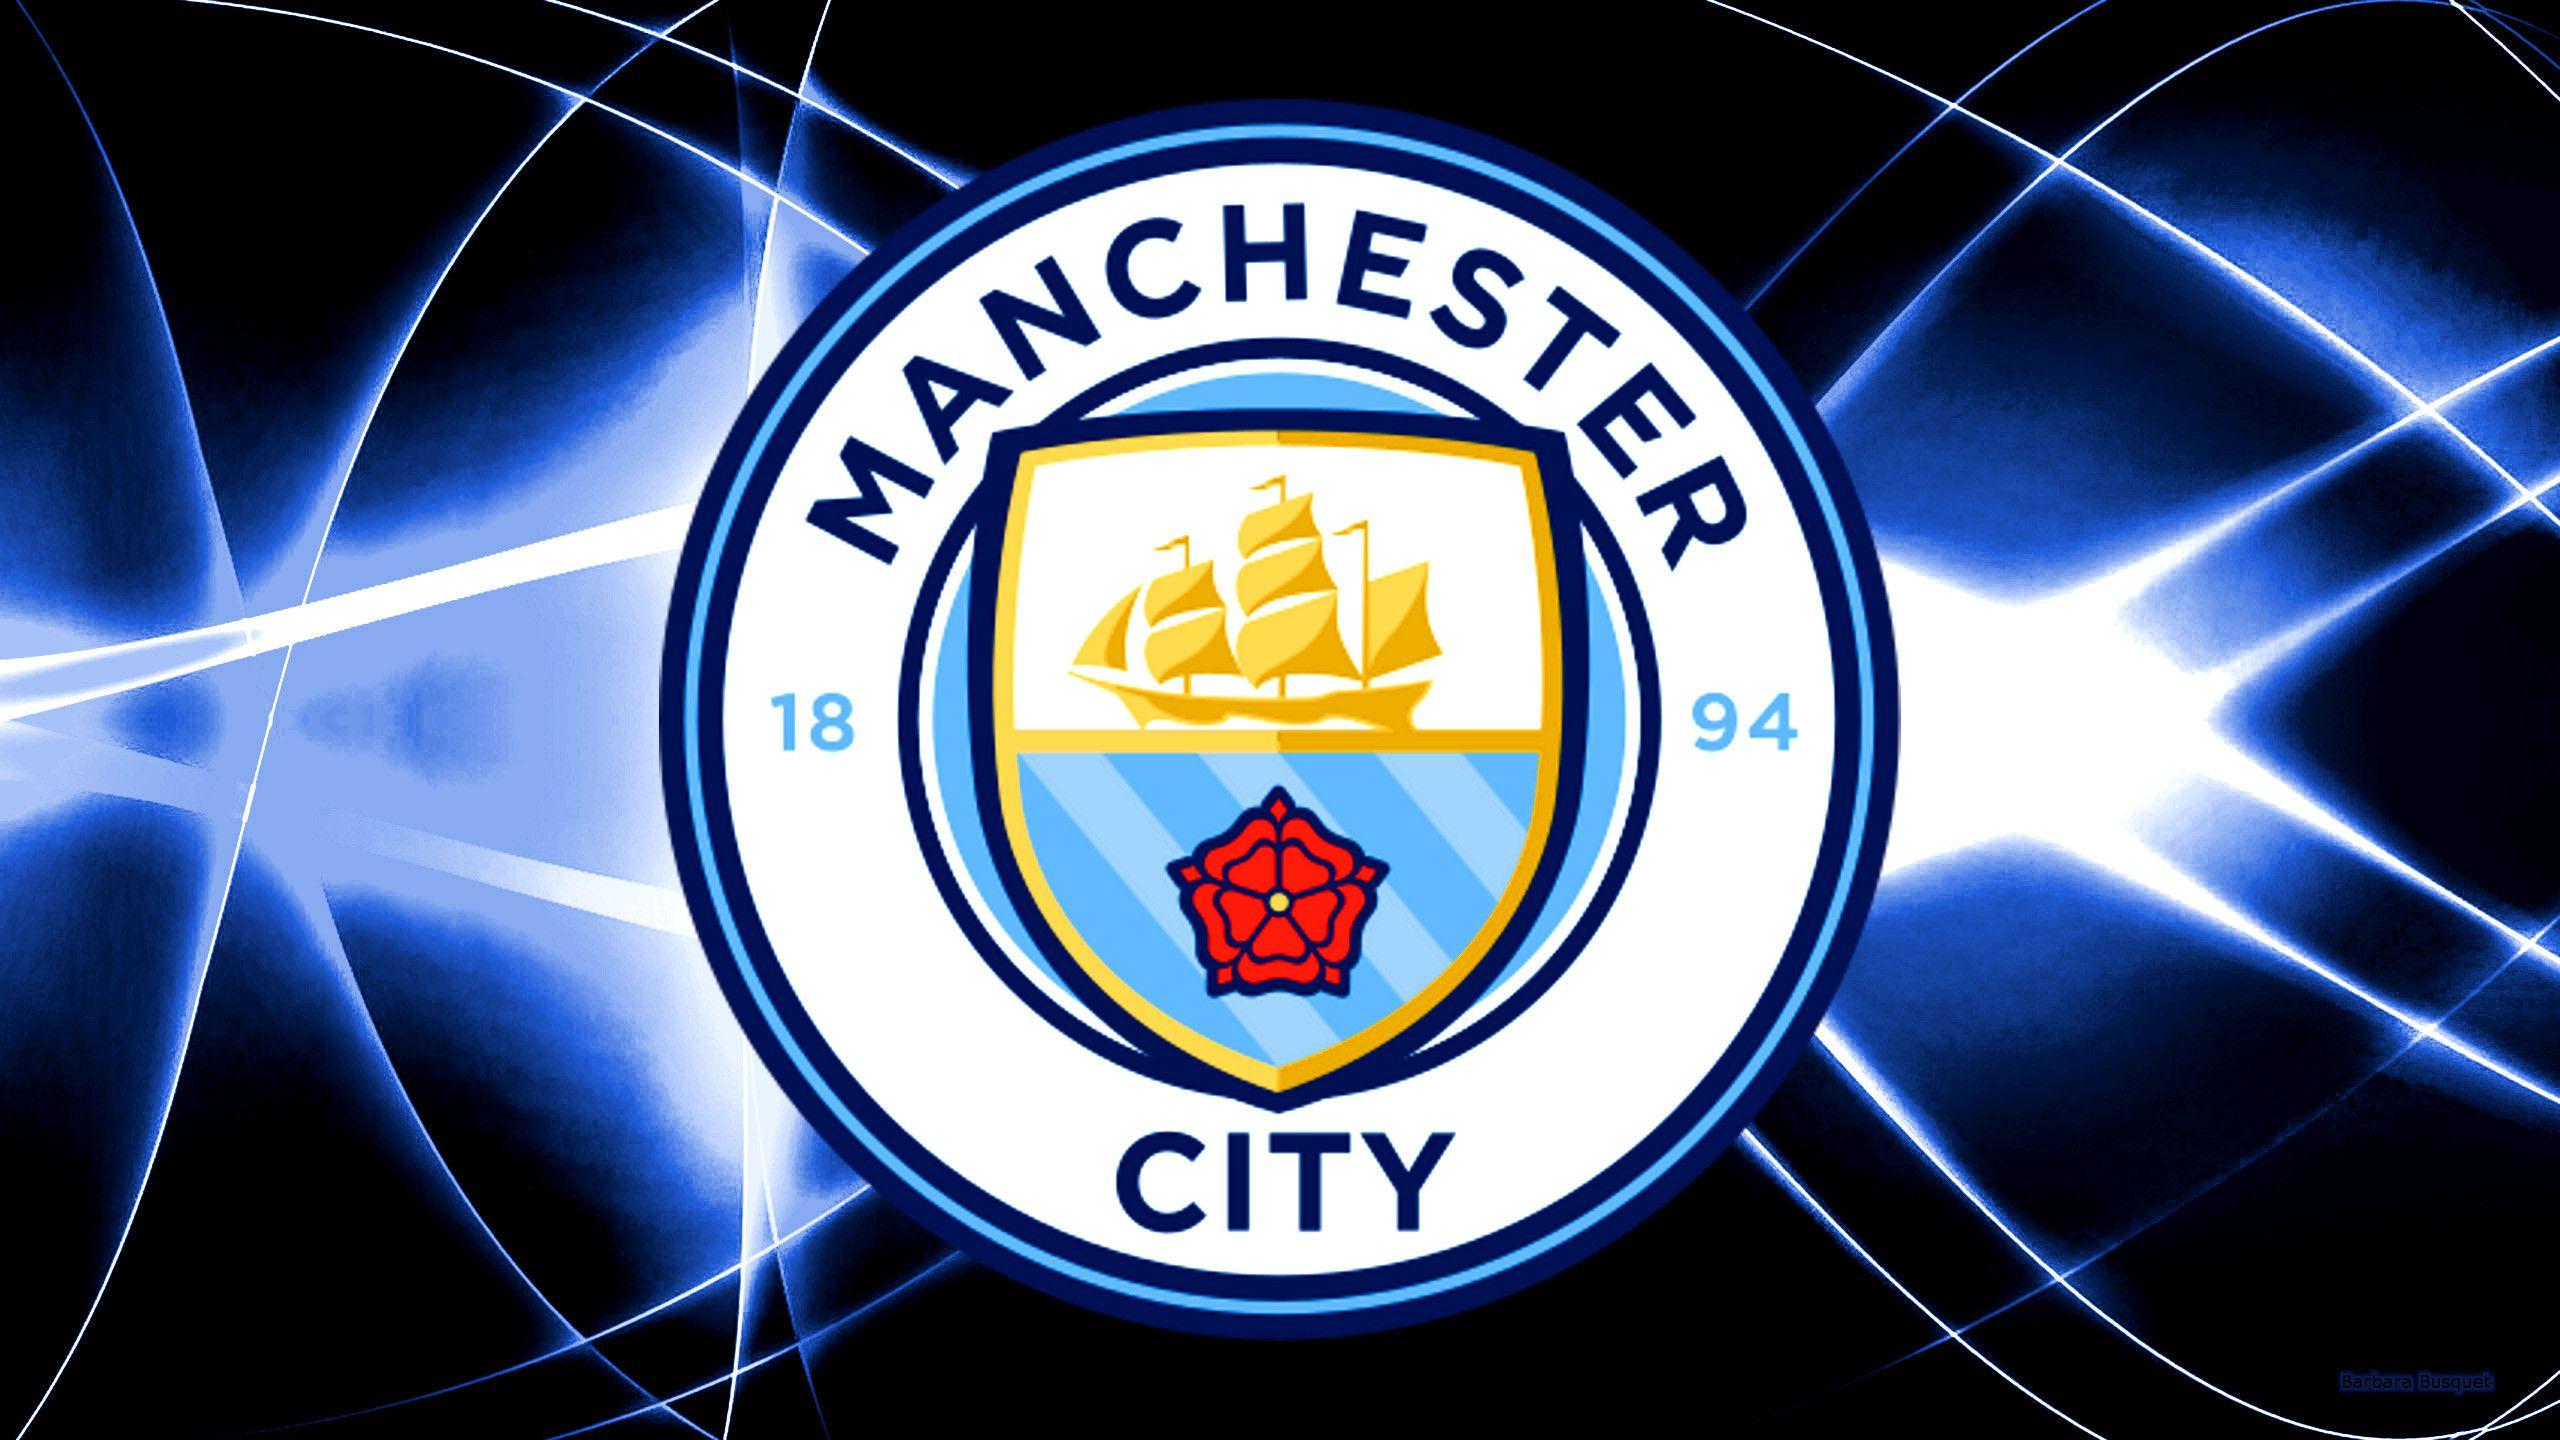 Manchester City Football Club Wallpapers Top Free Manchester City Football Club Backgrounds Wallpaperaccess